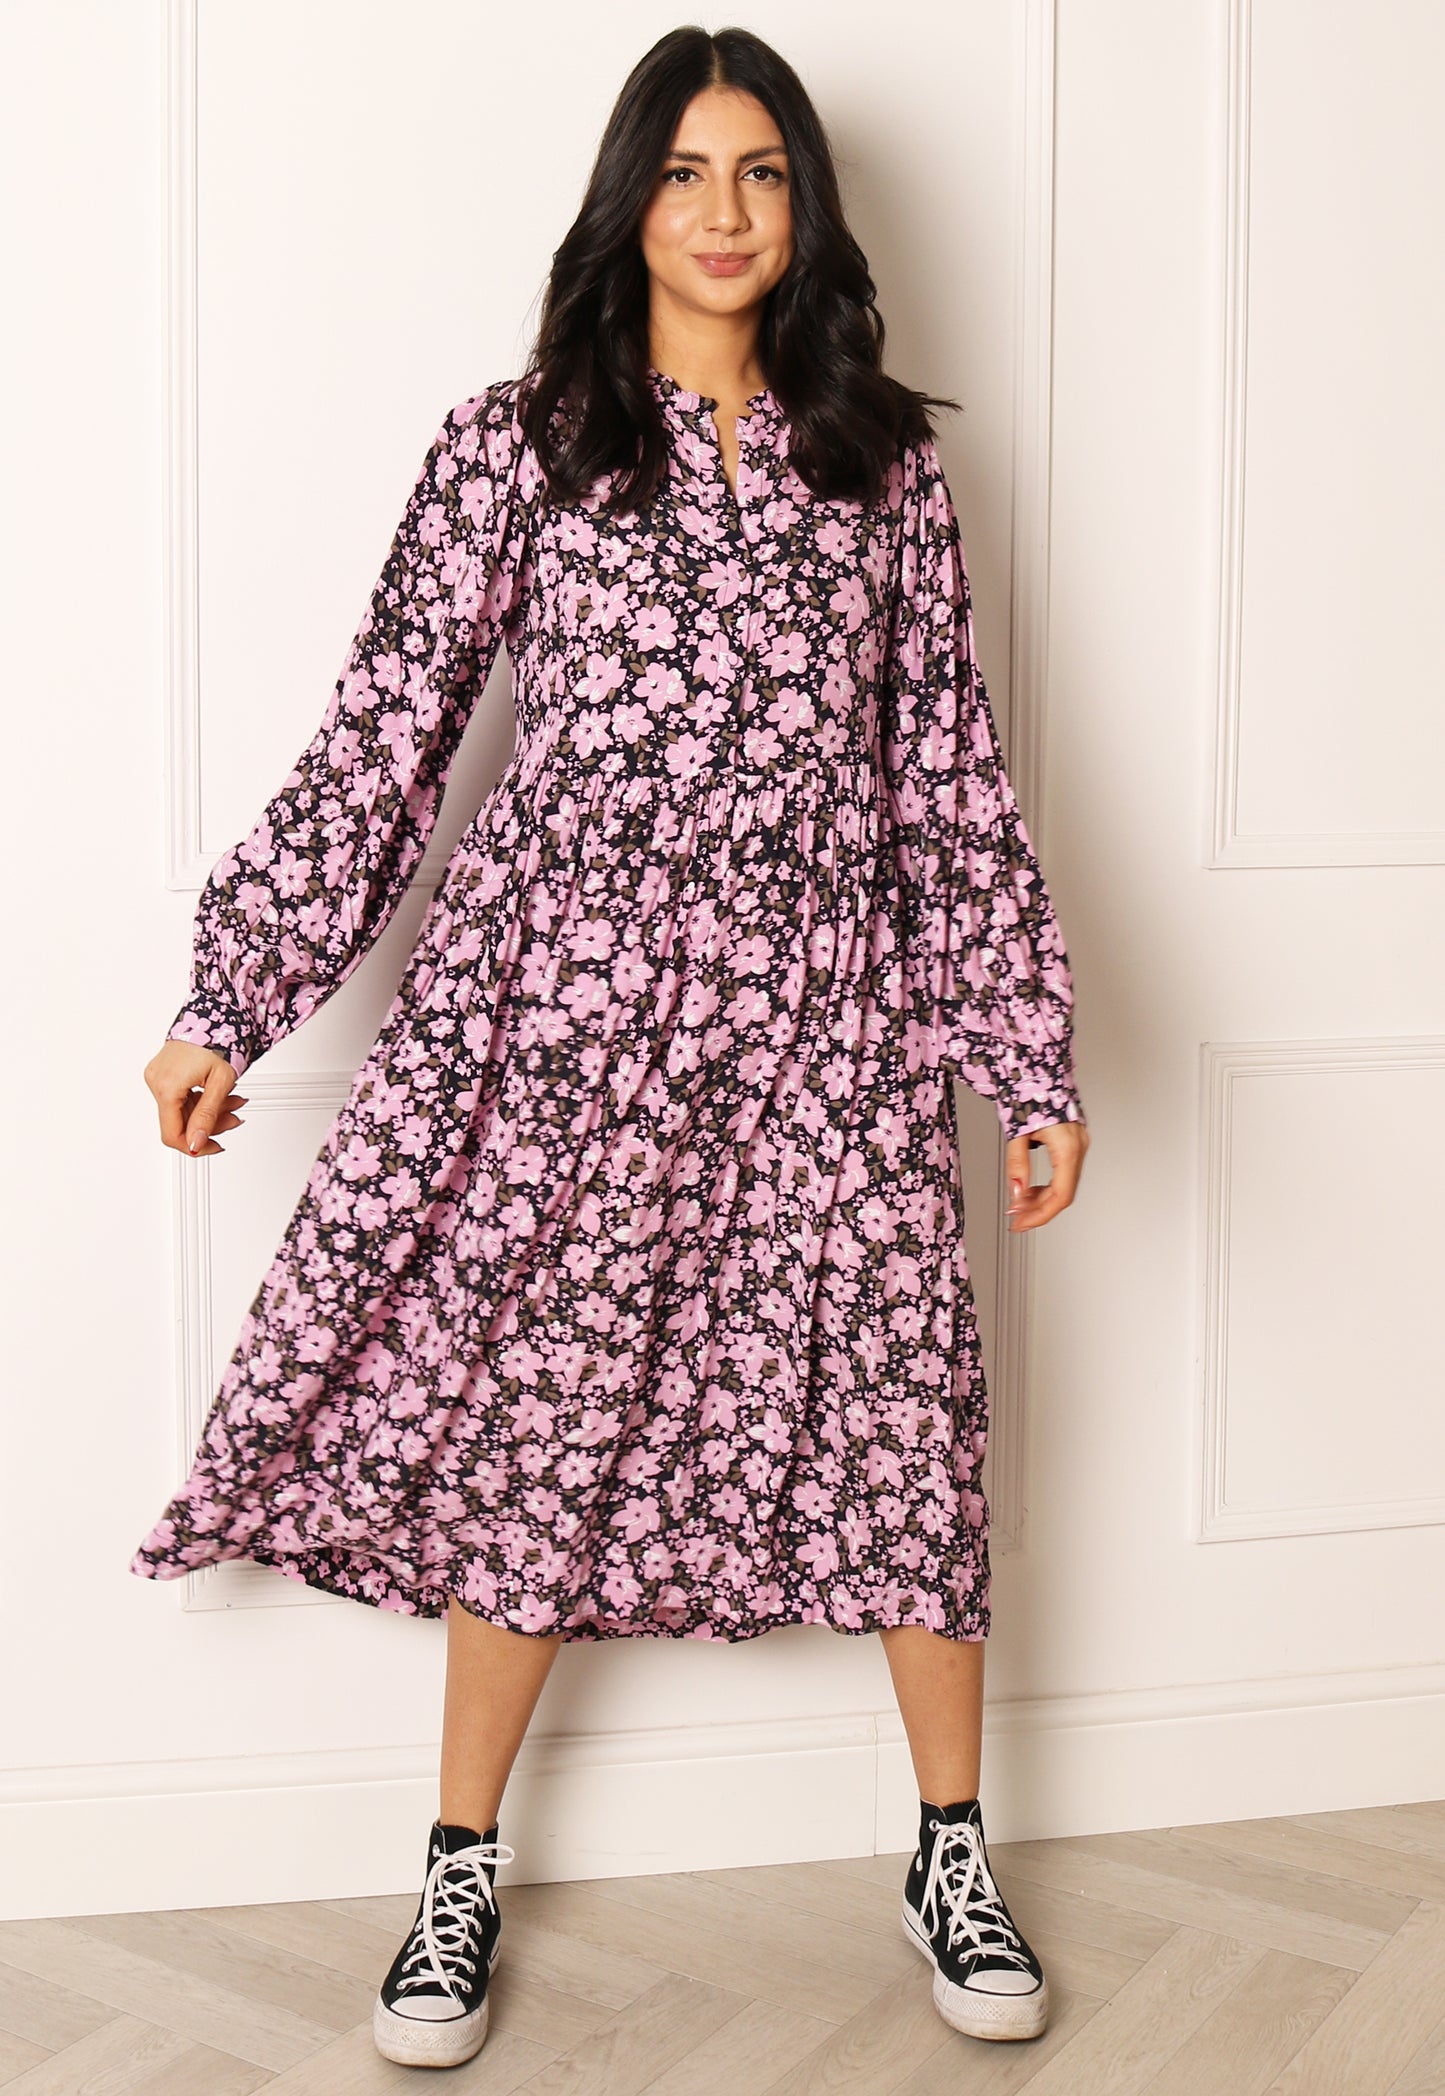 PIECES Athena Floral Smock Button Midi Dress in Black & Pink